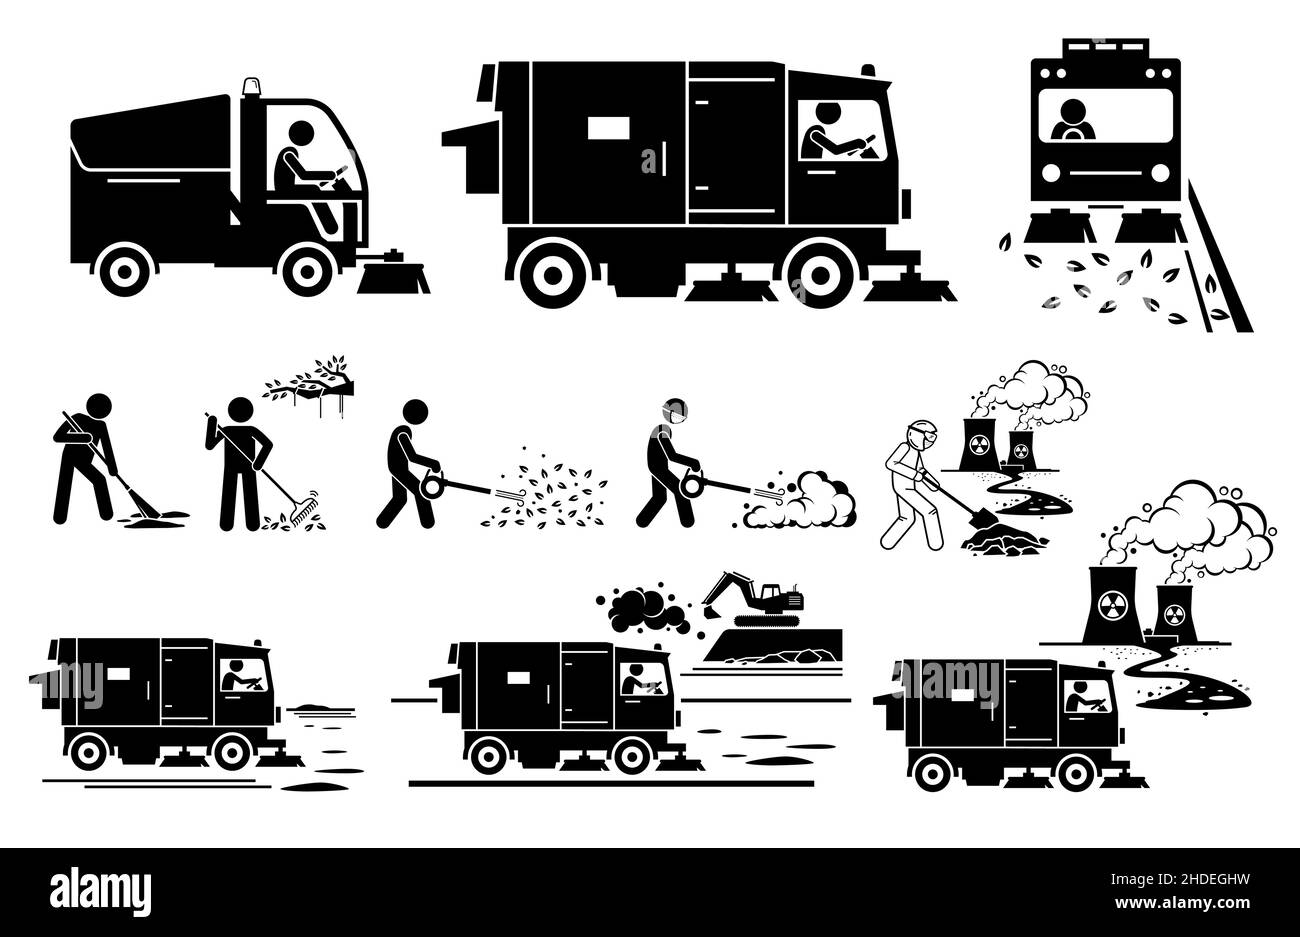 Street sweeper truck and worker collecting dirt, dusty, leaves, toxic waste on road side. Vector illustrations of people sweeping street and road with Stock Vector